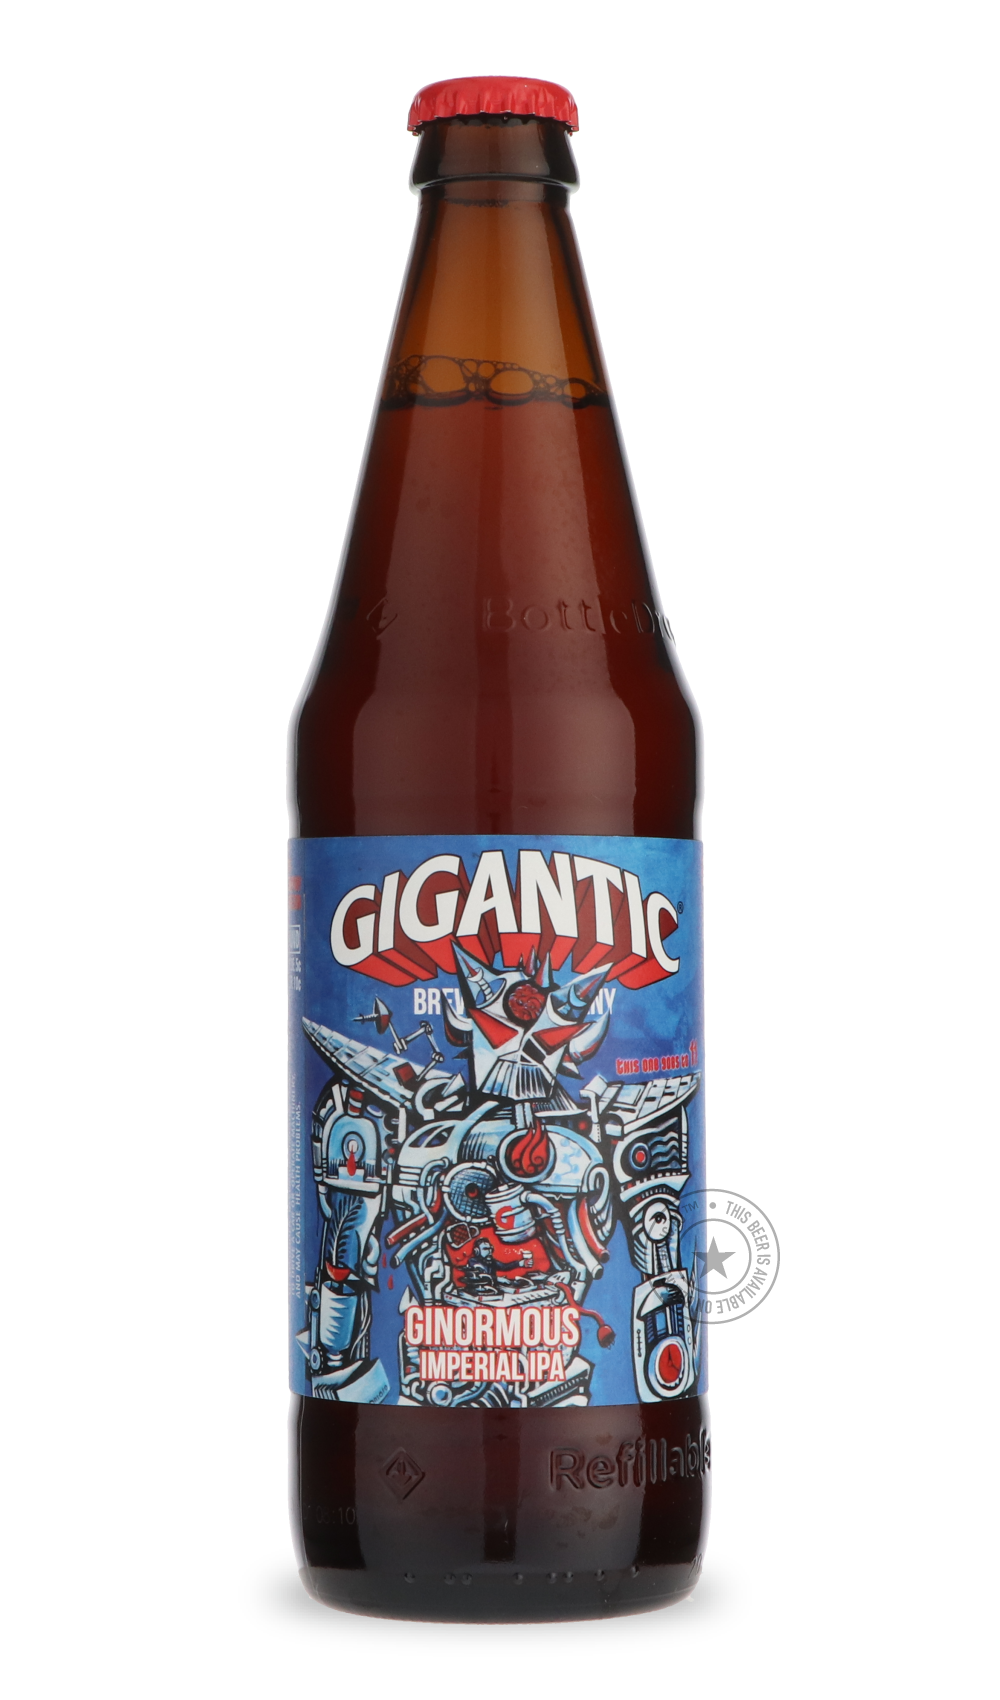 -Gigantic- Ginormous-IPA- Only @ Beer Republic - The best online beer store for American & Canadian craft beer - Buy beer online from the USA and Canada - Bier online kopen - Amerikaans bier kopen - Craft beer store - Craft beer kopen - Amerikanisch bier kaufen - Bier online kaufen - Acheter biere online - IPA - Stout - Porter - New England IPA - Hazy IPA - Imperial Stout - Barrel Aged - Barrel Aged Imperial Stout - Brown - Dark beer - Blond - Blonde - Pilsner - Lager - Wheat - Weizen - Amber - Barley Wine 